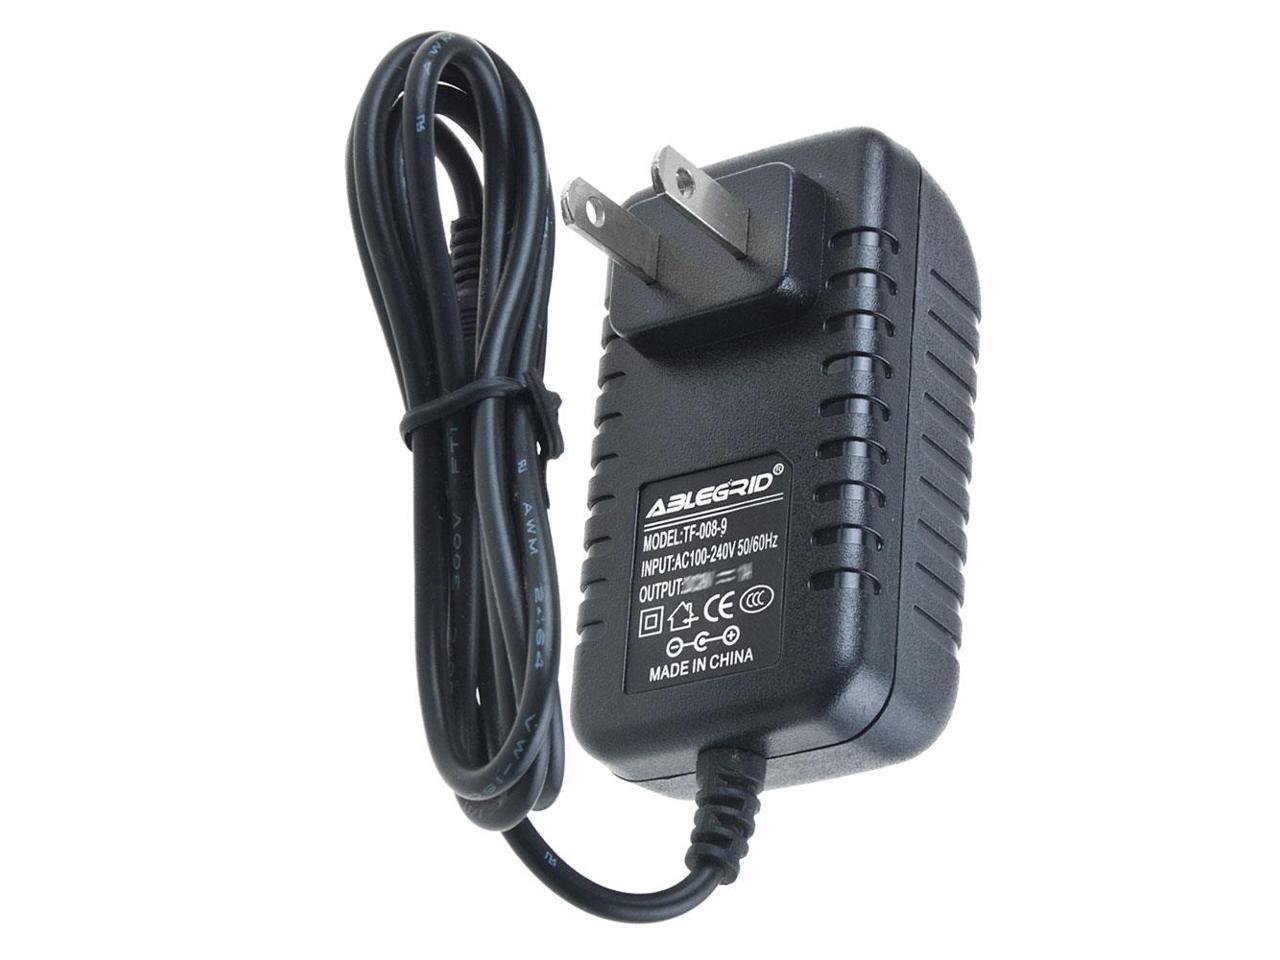 DC 9V Pedal AC Adapter For Ibanez AC109 Regulated Power Supply Wall Charger PSU 